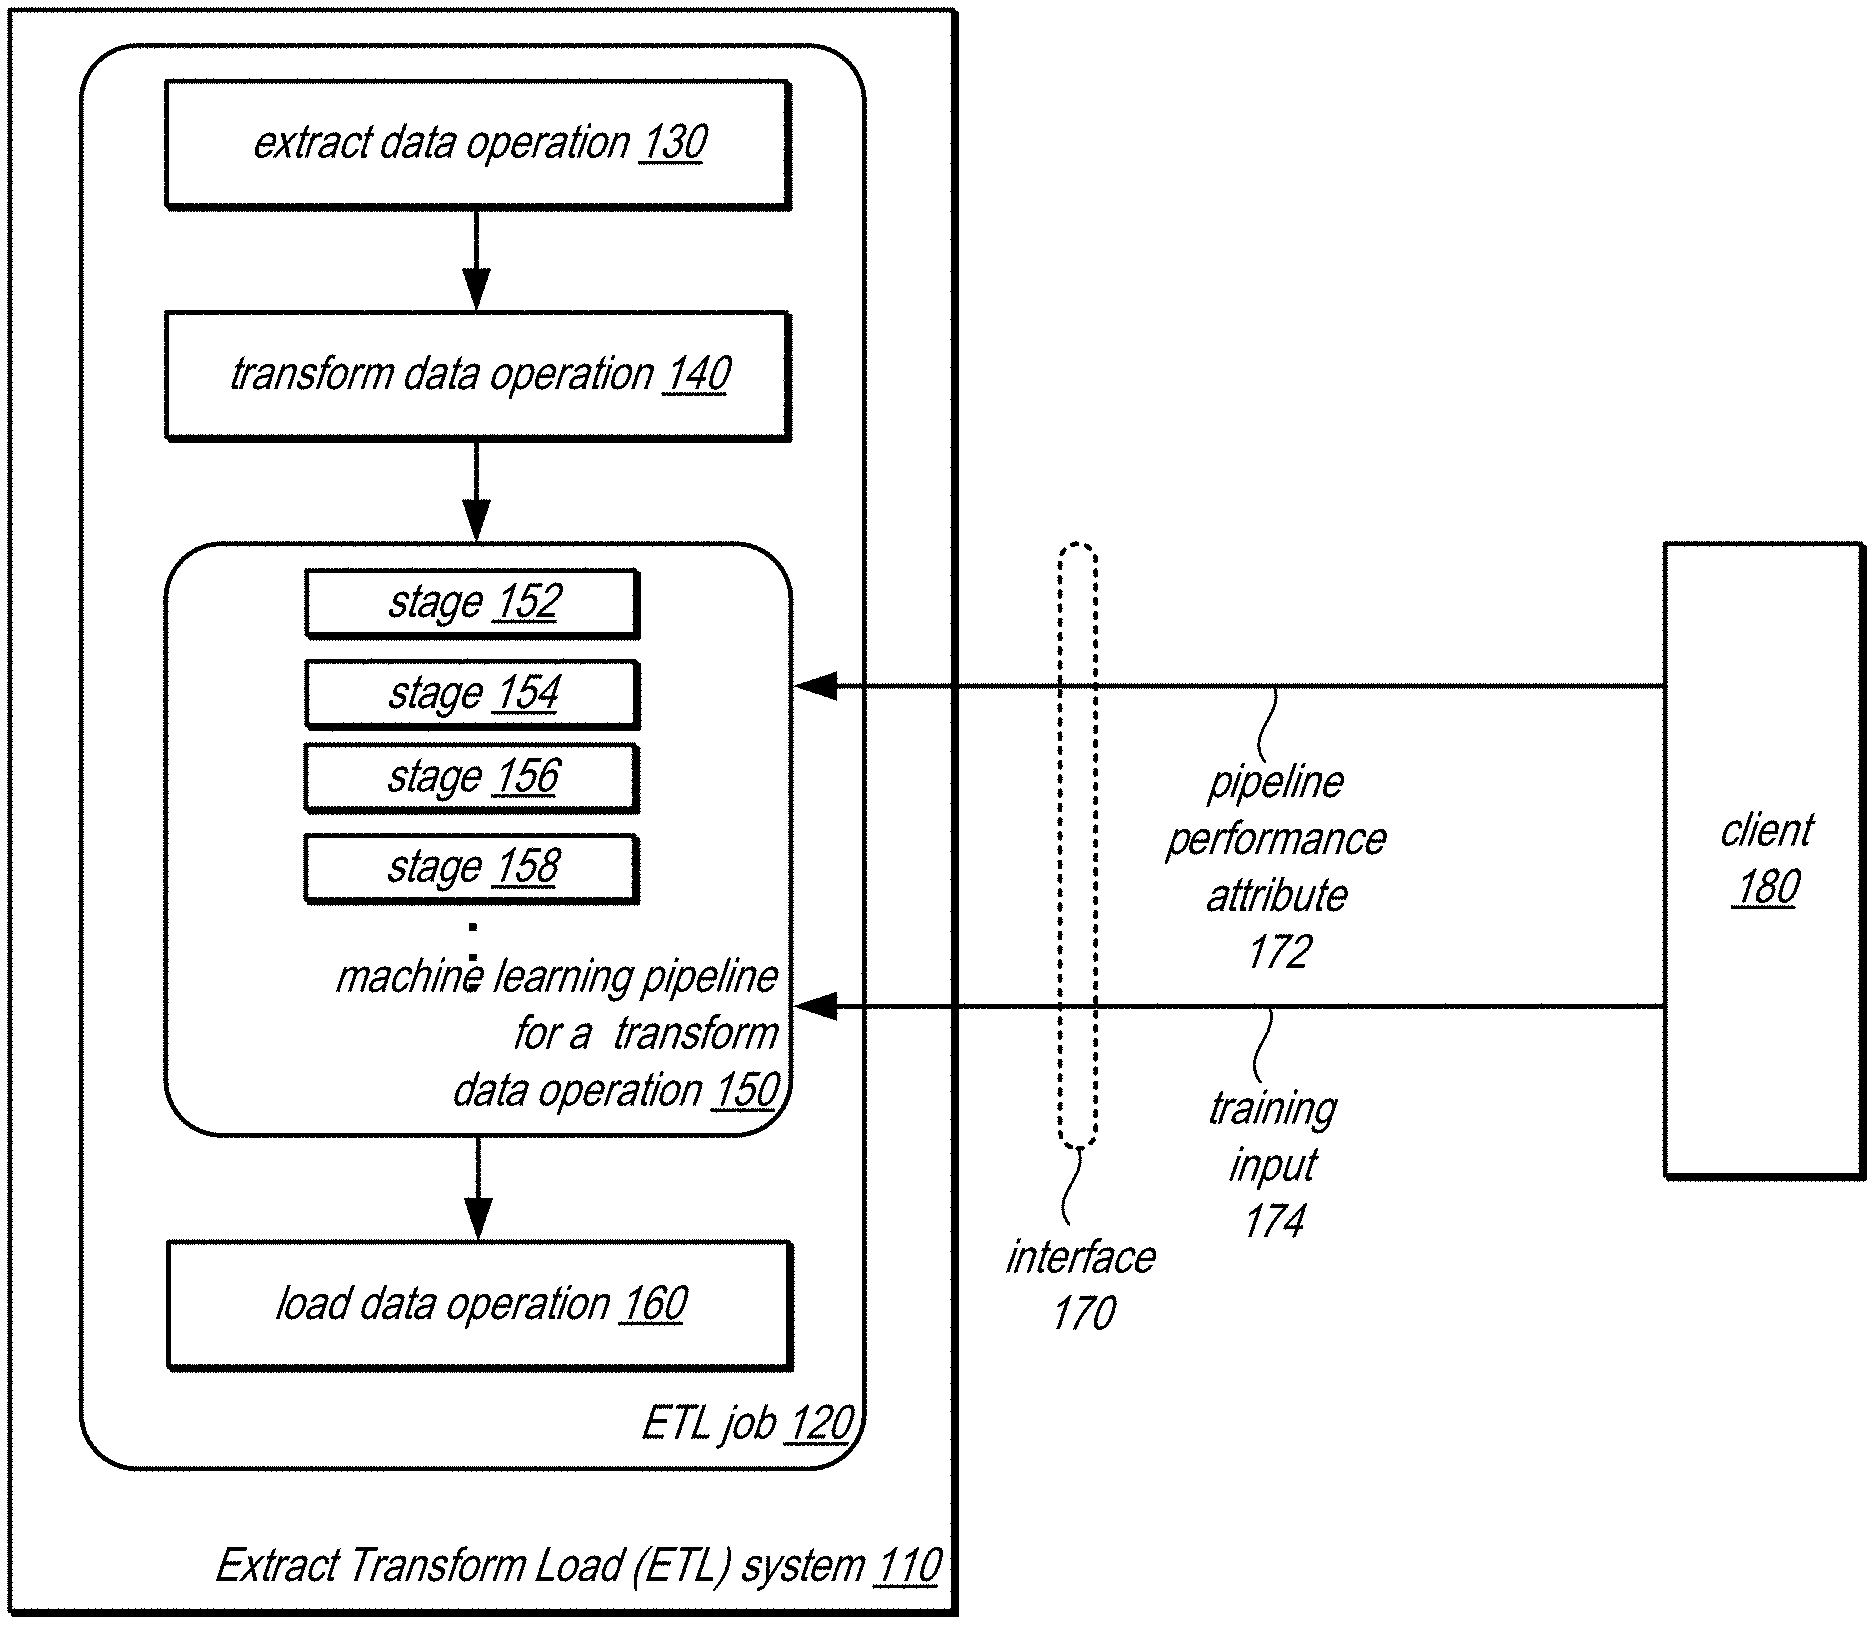 Auto ML for Record Linkage Patent Image